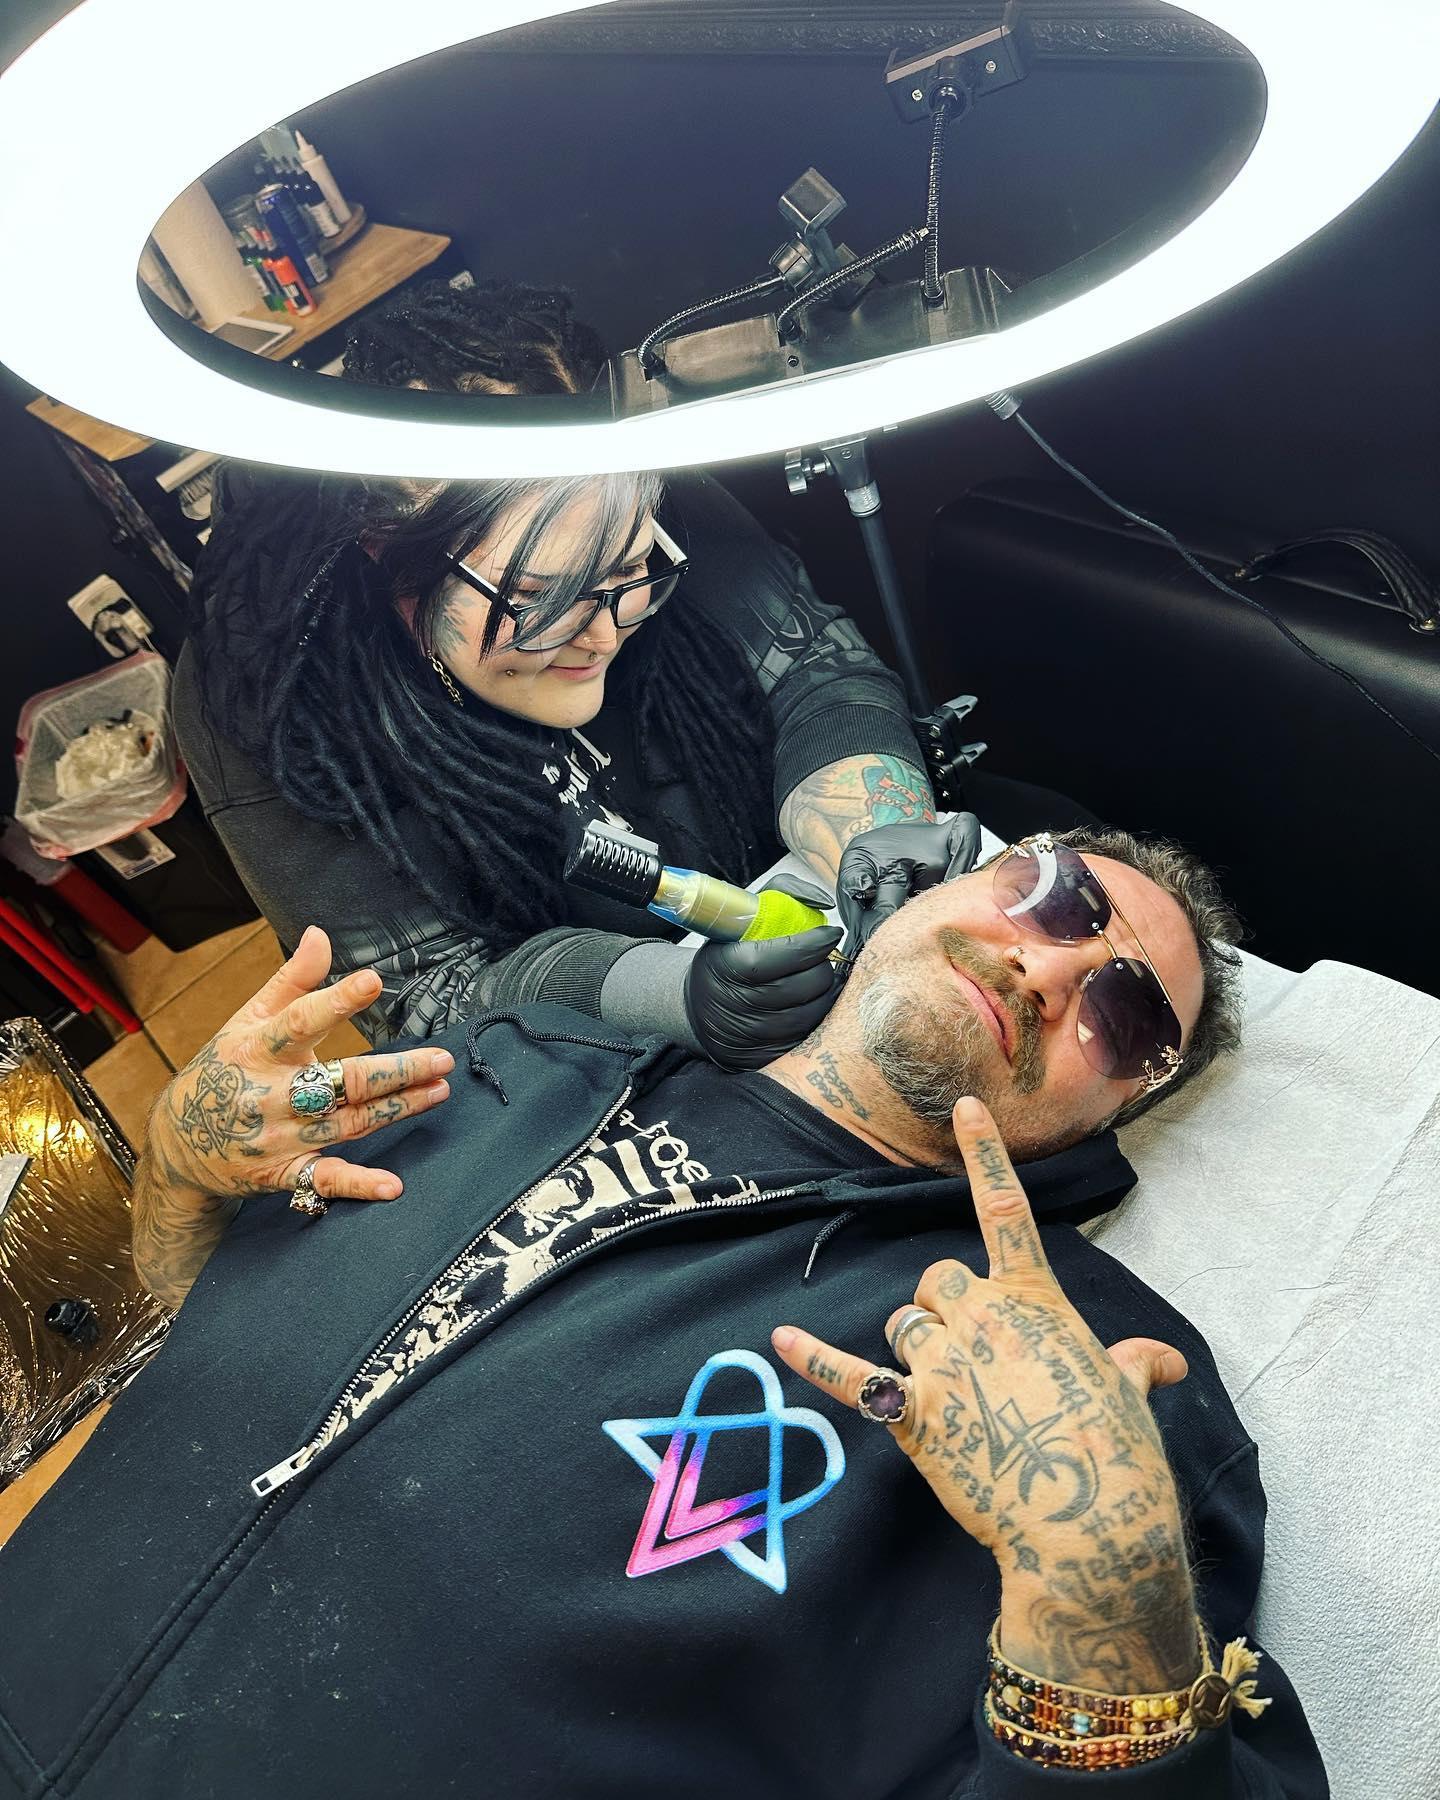 Bam Margera Gets Britney Spears-Inspired Tattoo